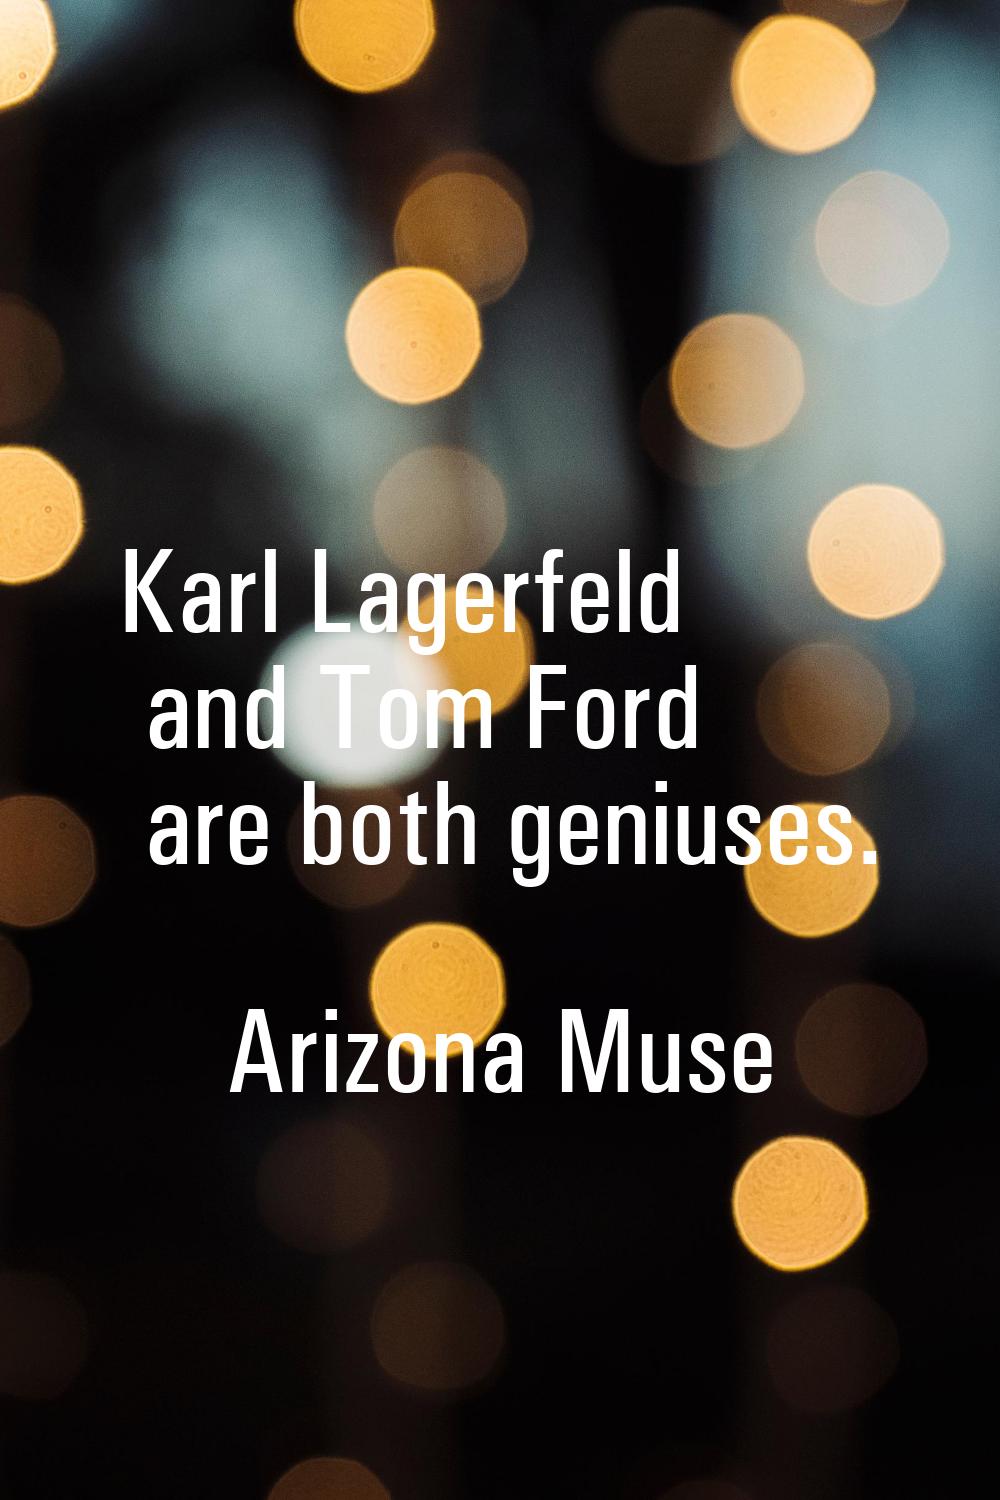 Karl Lagerfeld and Tom Ford are both geniuses.